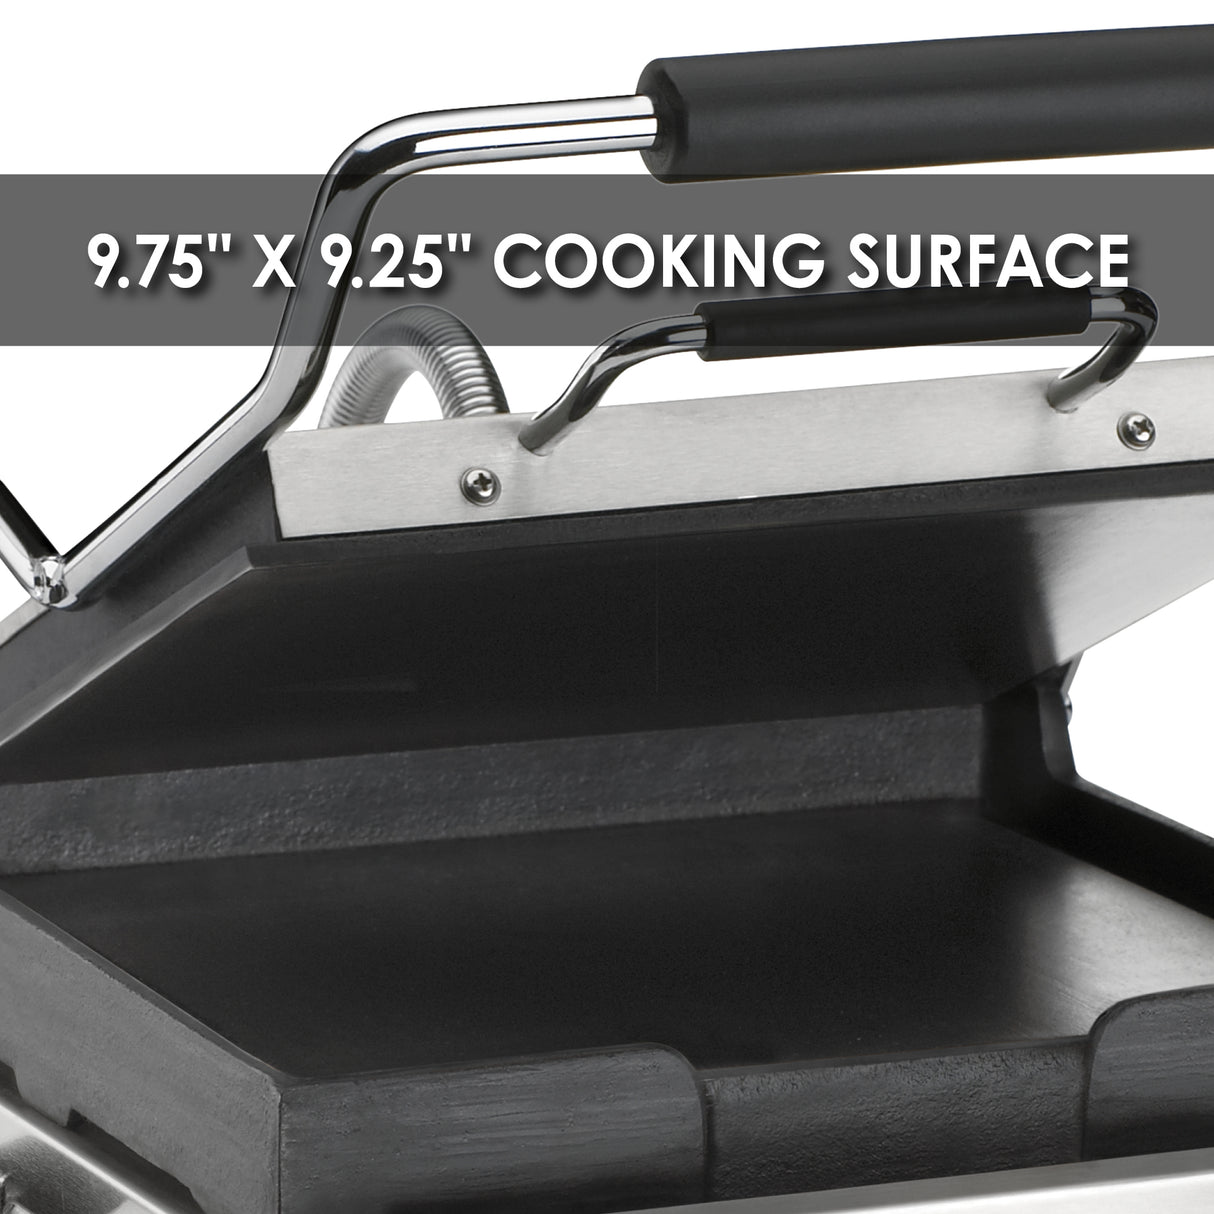 Waring COMPACT ITALIAN-STYLE FLAT GRILL – 120V  Model: WFG150